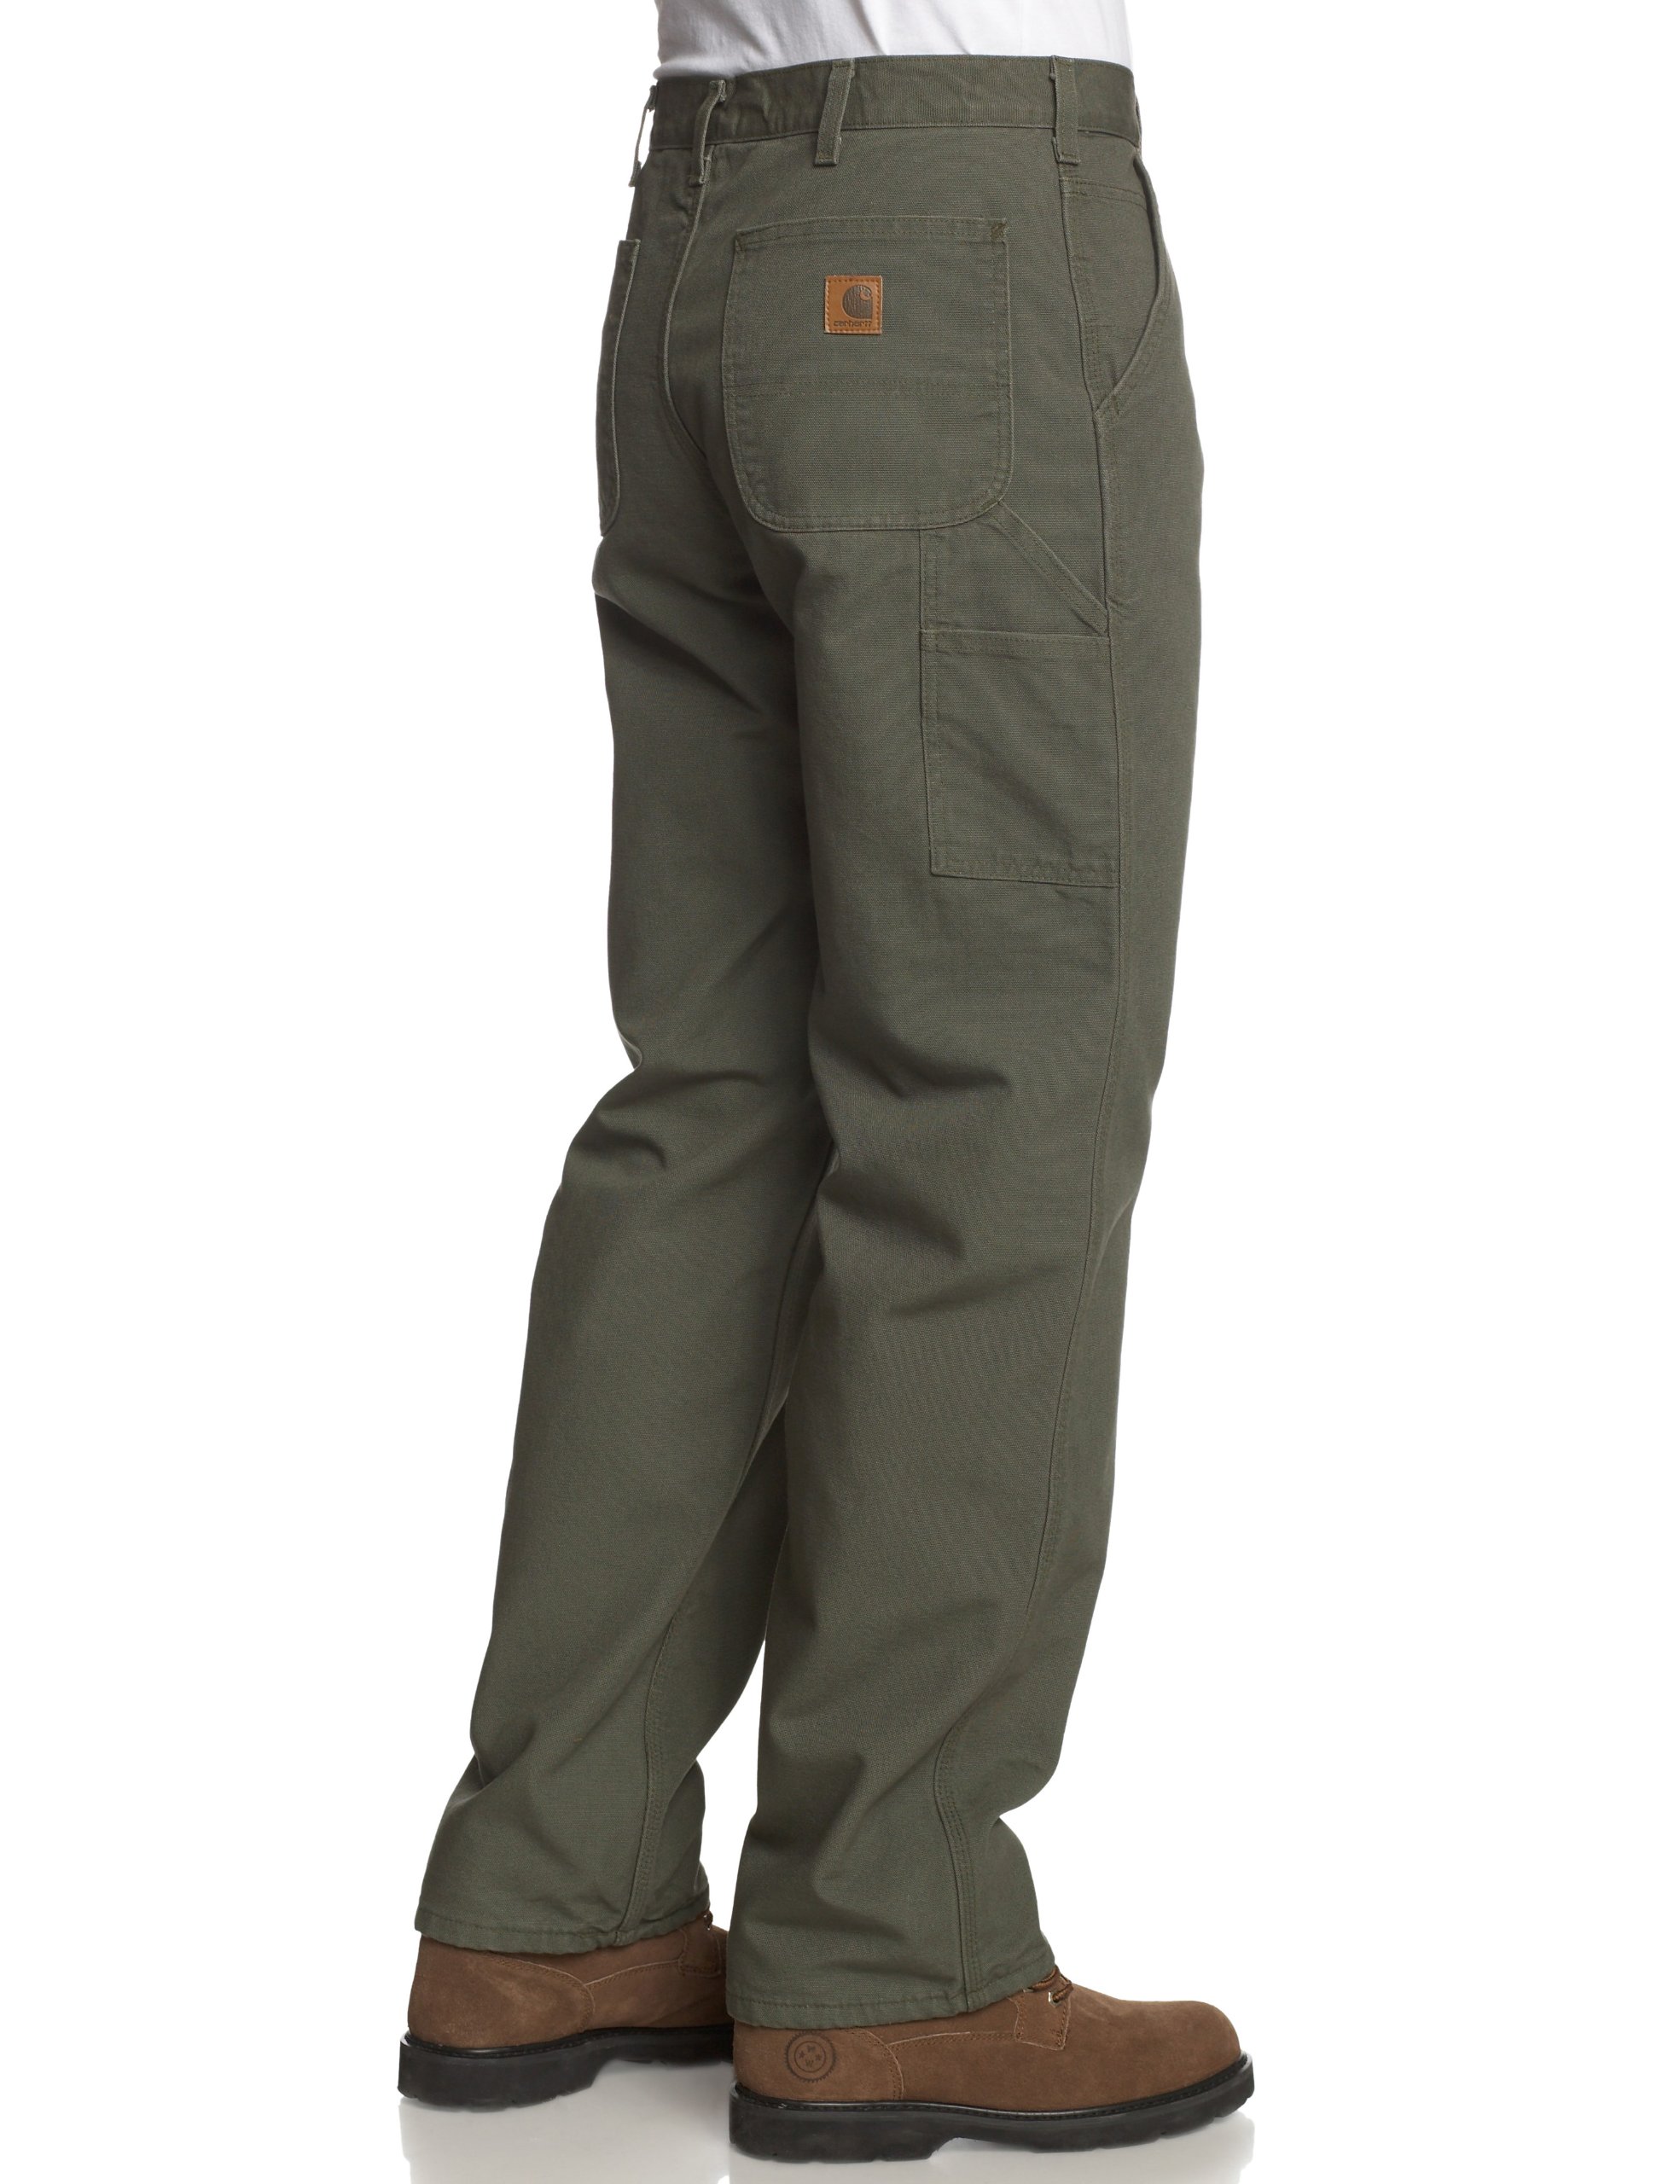 Carhartt Men's Loose Fit Washed Duck Flannel-Lined Utility Work Pant